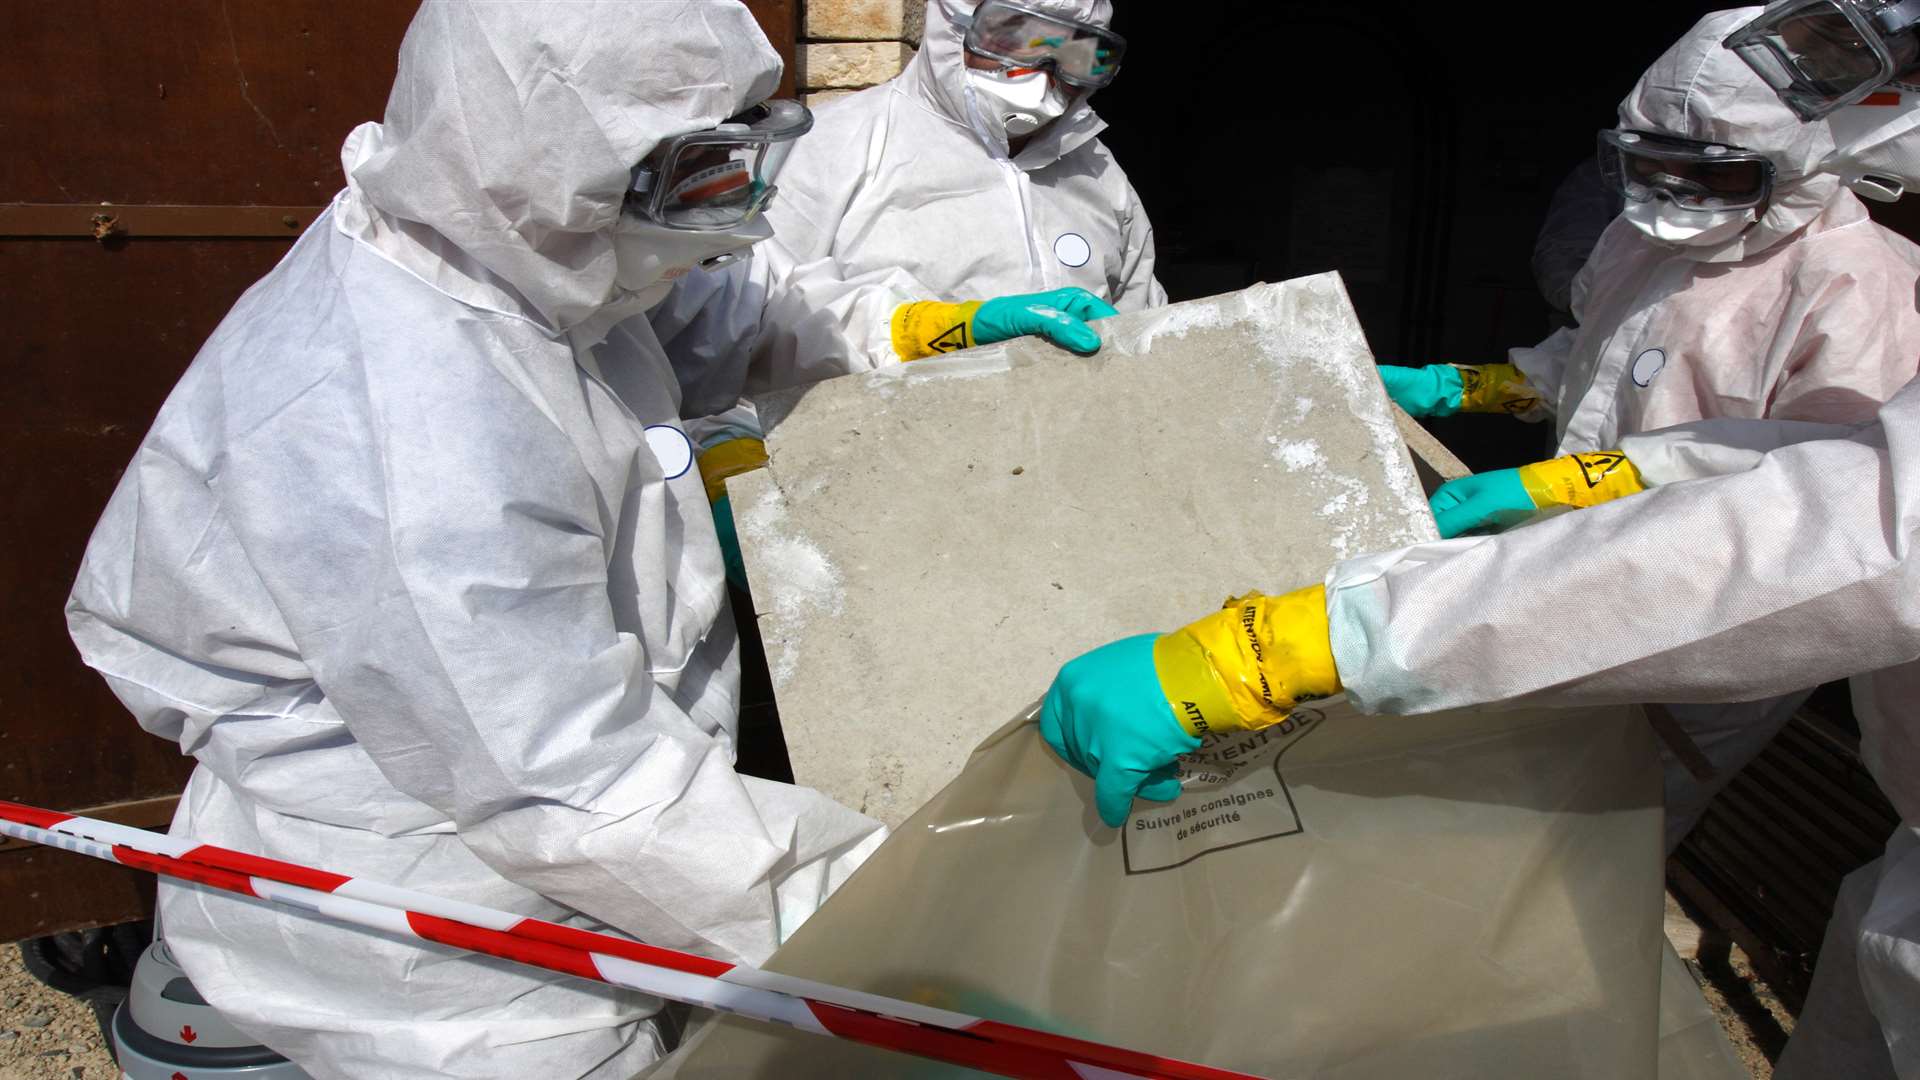 Asbestos is removed from building. Library image.